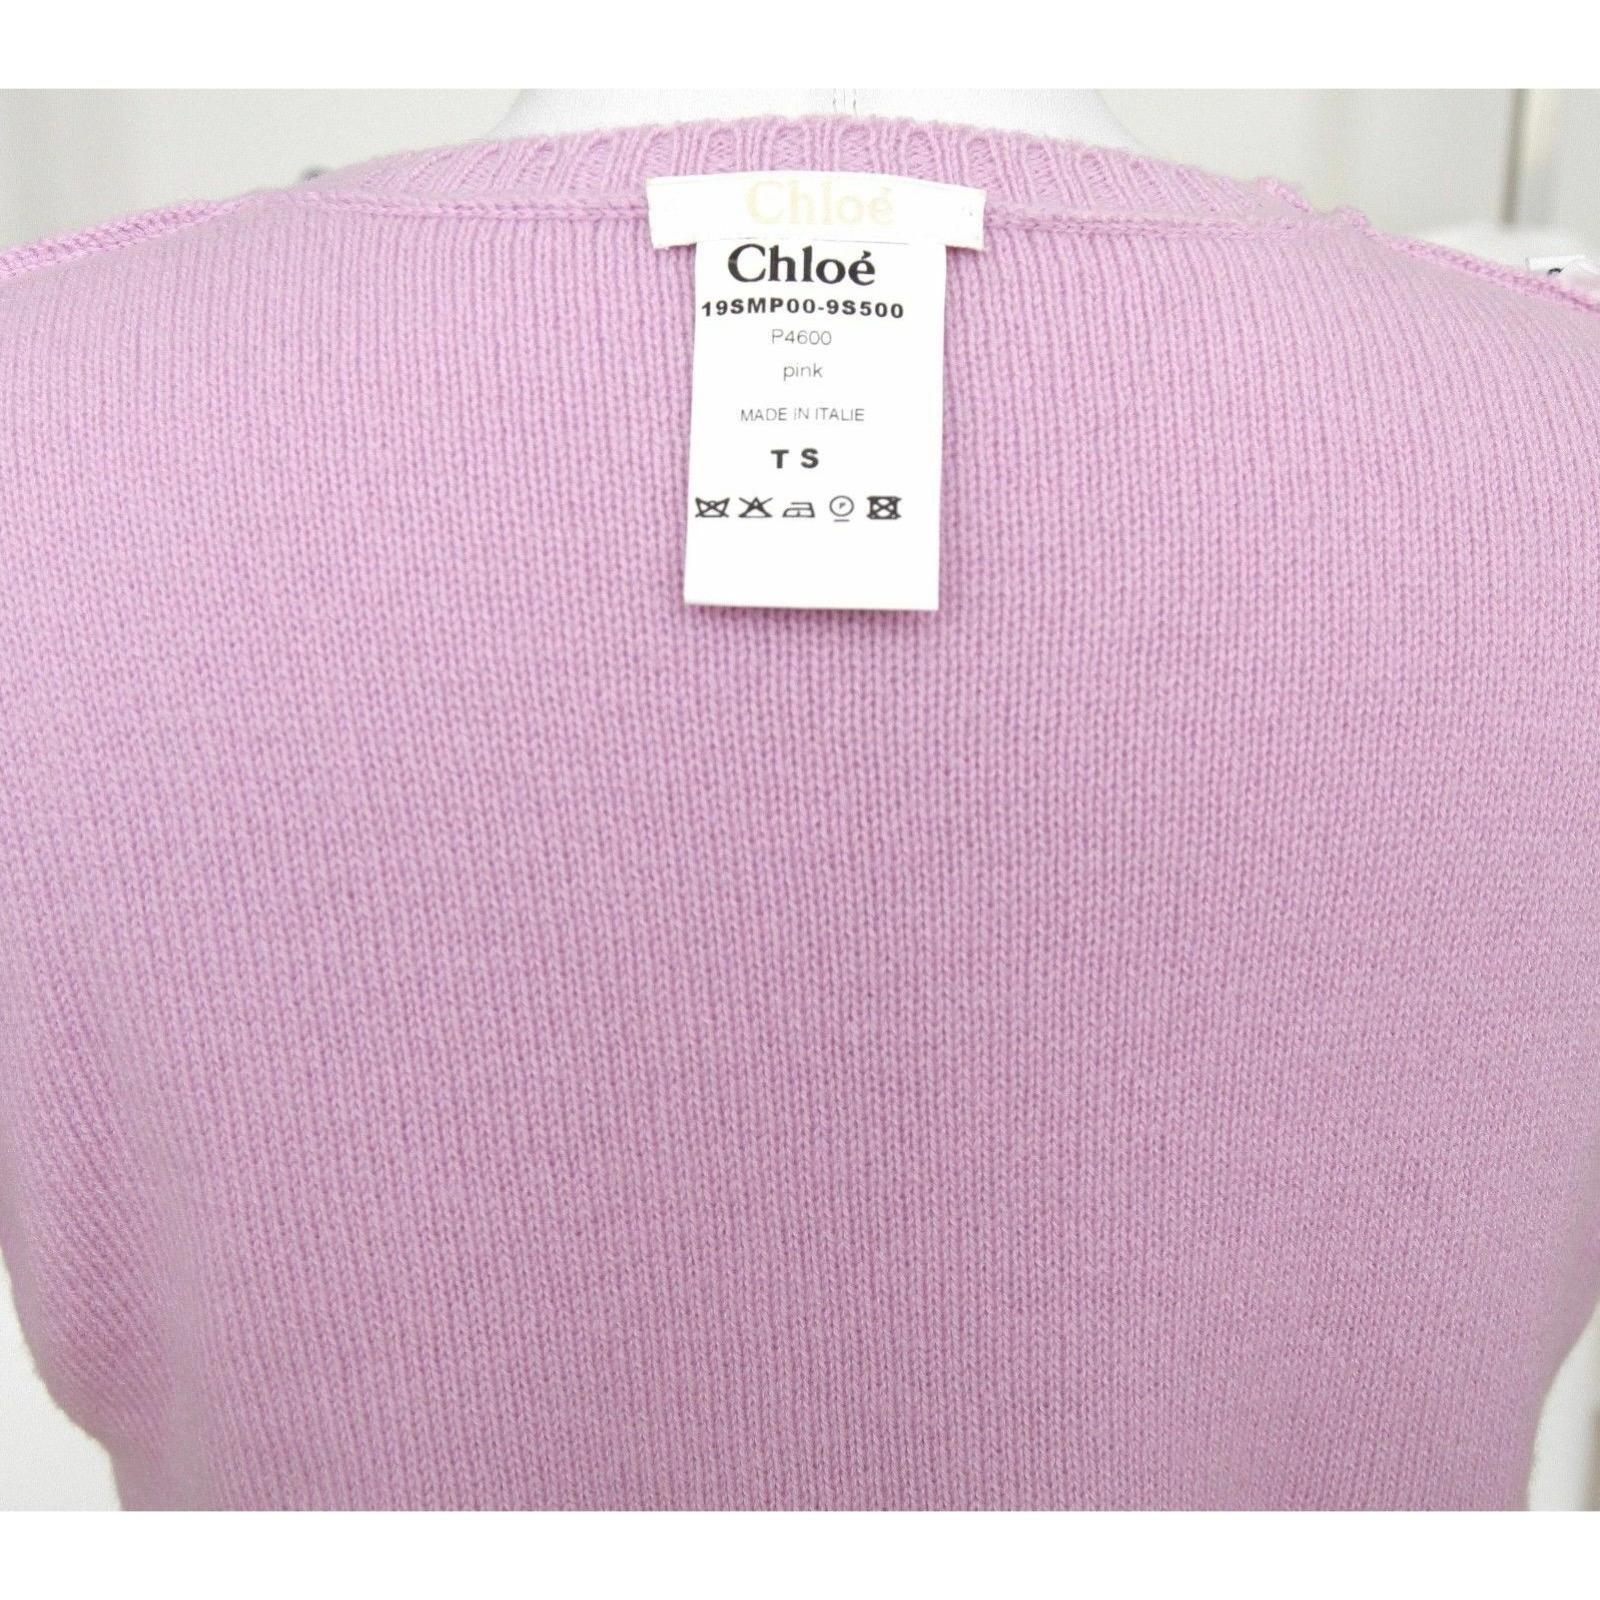 CHLOE Sweater Knit Short Sleeve Top Pink Crew Neck Wool Sz S For Sale 6